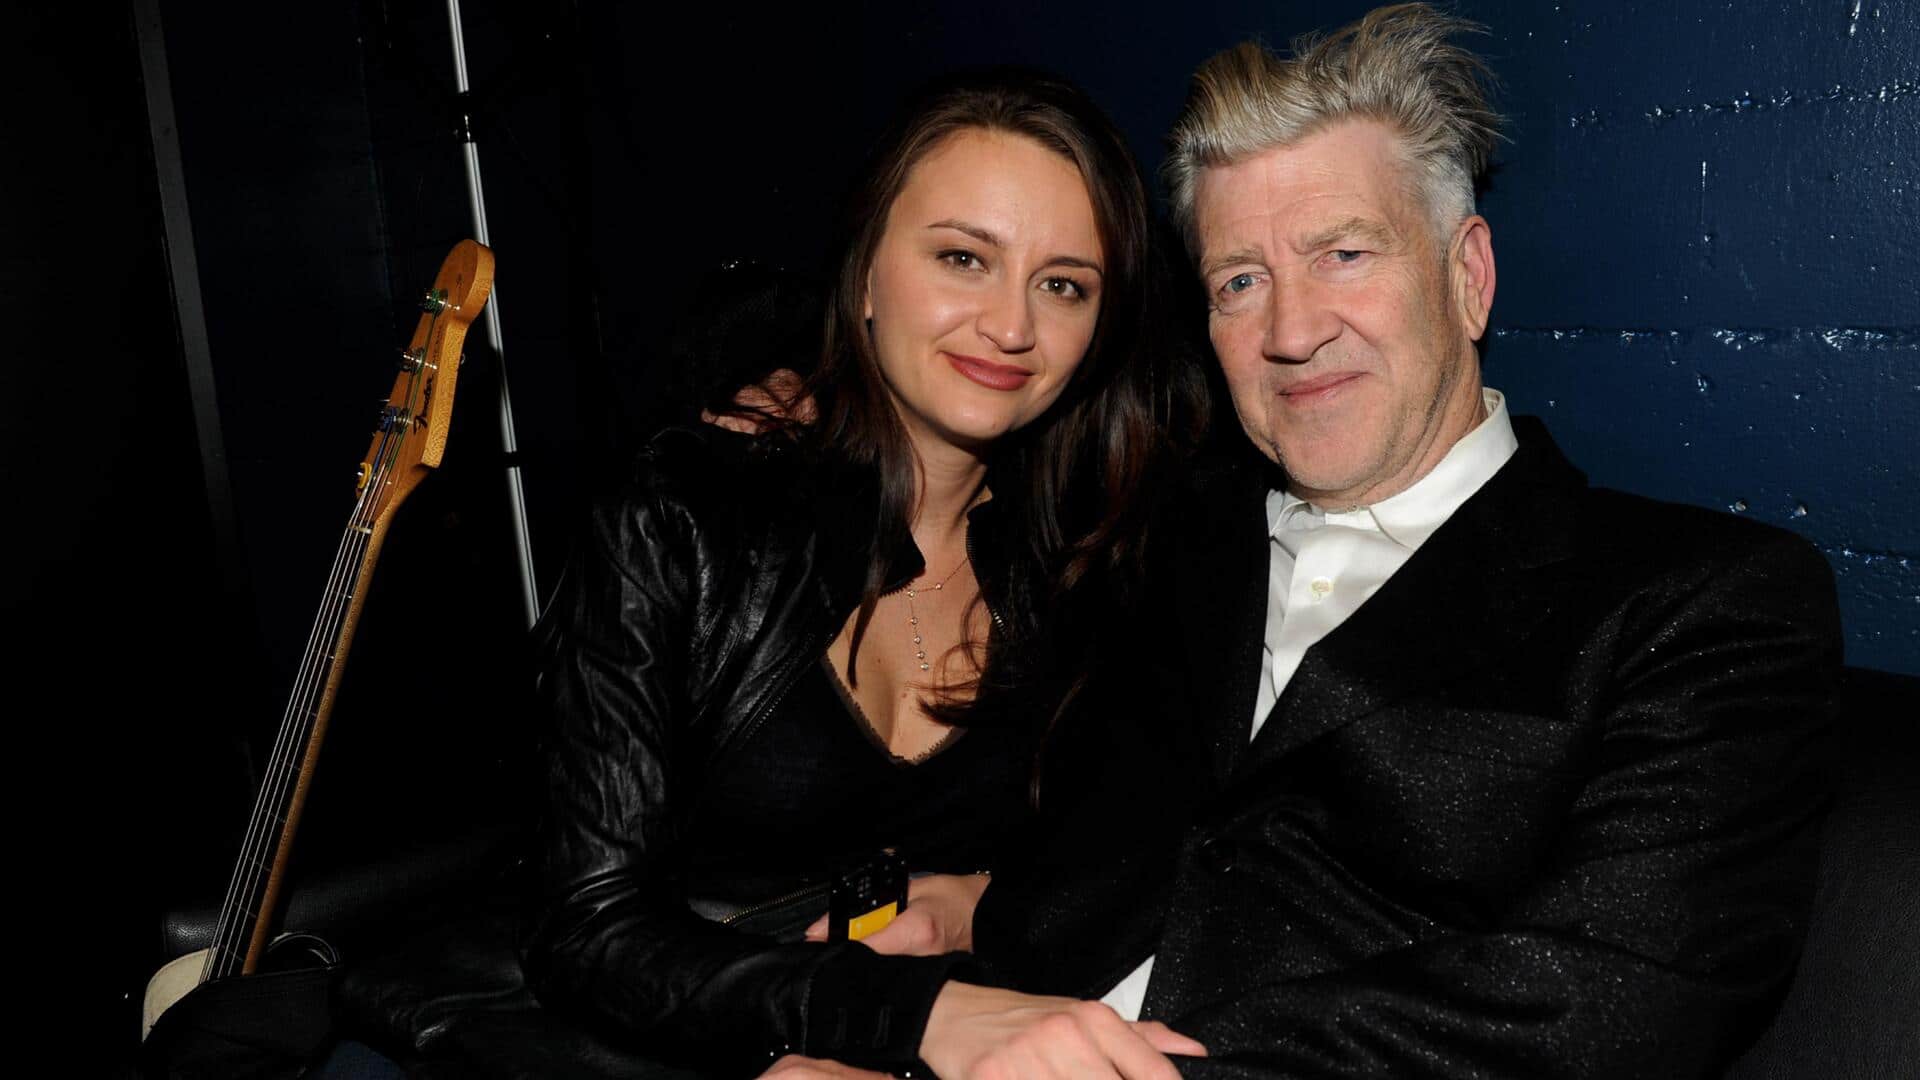 Director David Lynch, Emily Stofle headed for divorce—their relationship timeline